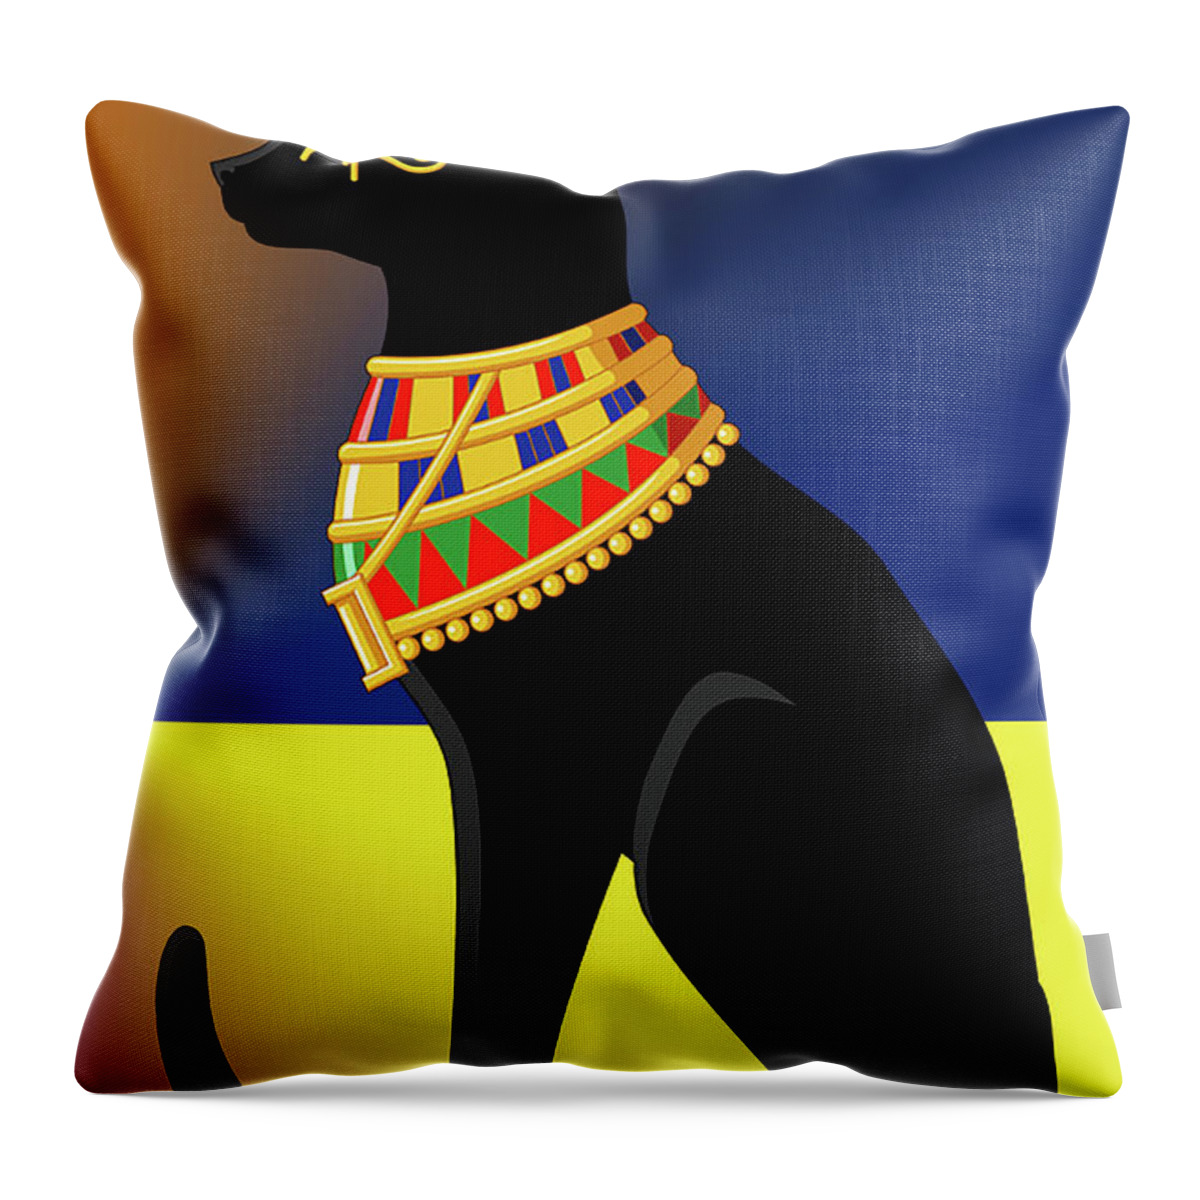 Staley Throw Pillow featuring the digital art Egyptian Cat 1 by Chuck Staley